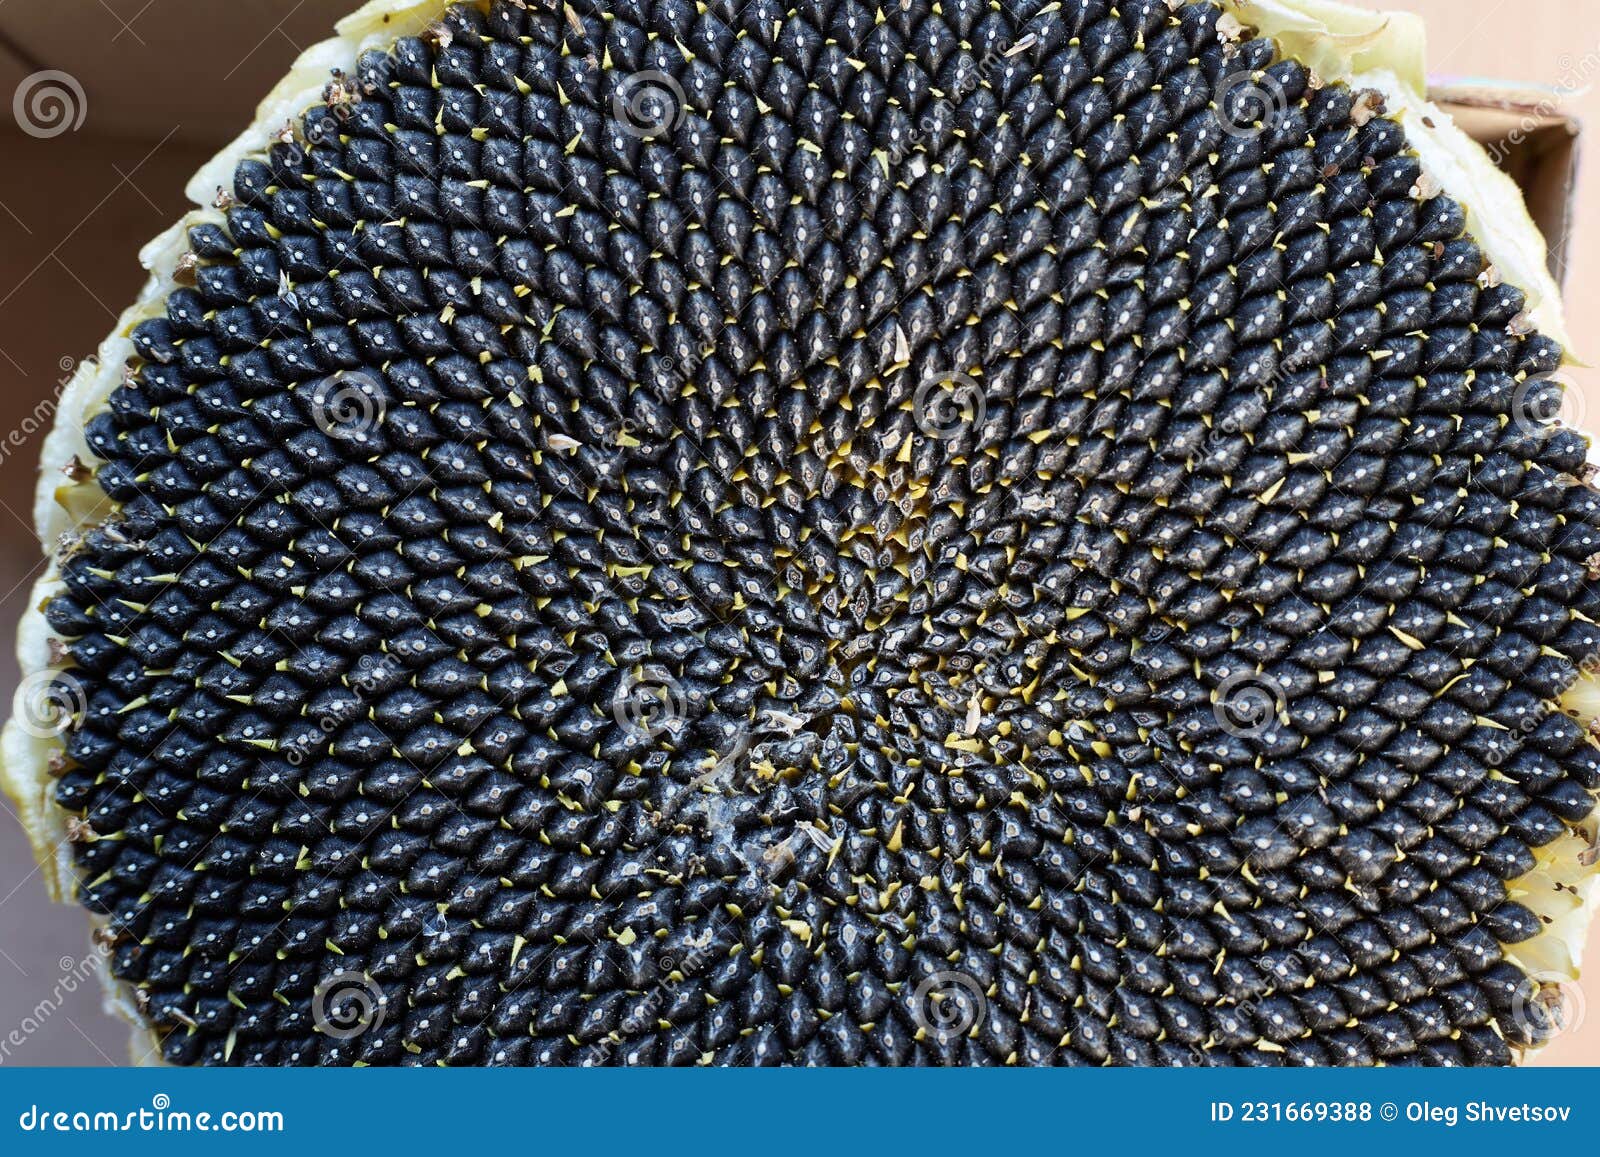 Sunflower Seeds are Taken in Close-up, Beautiful and Natural Seed ...